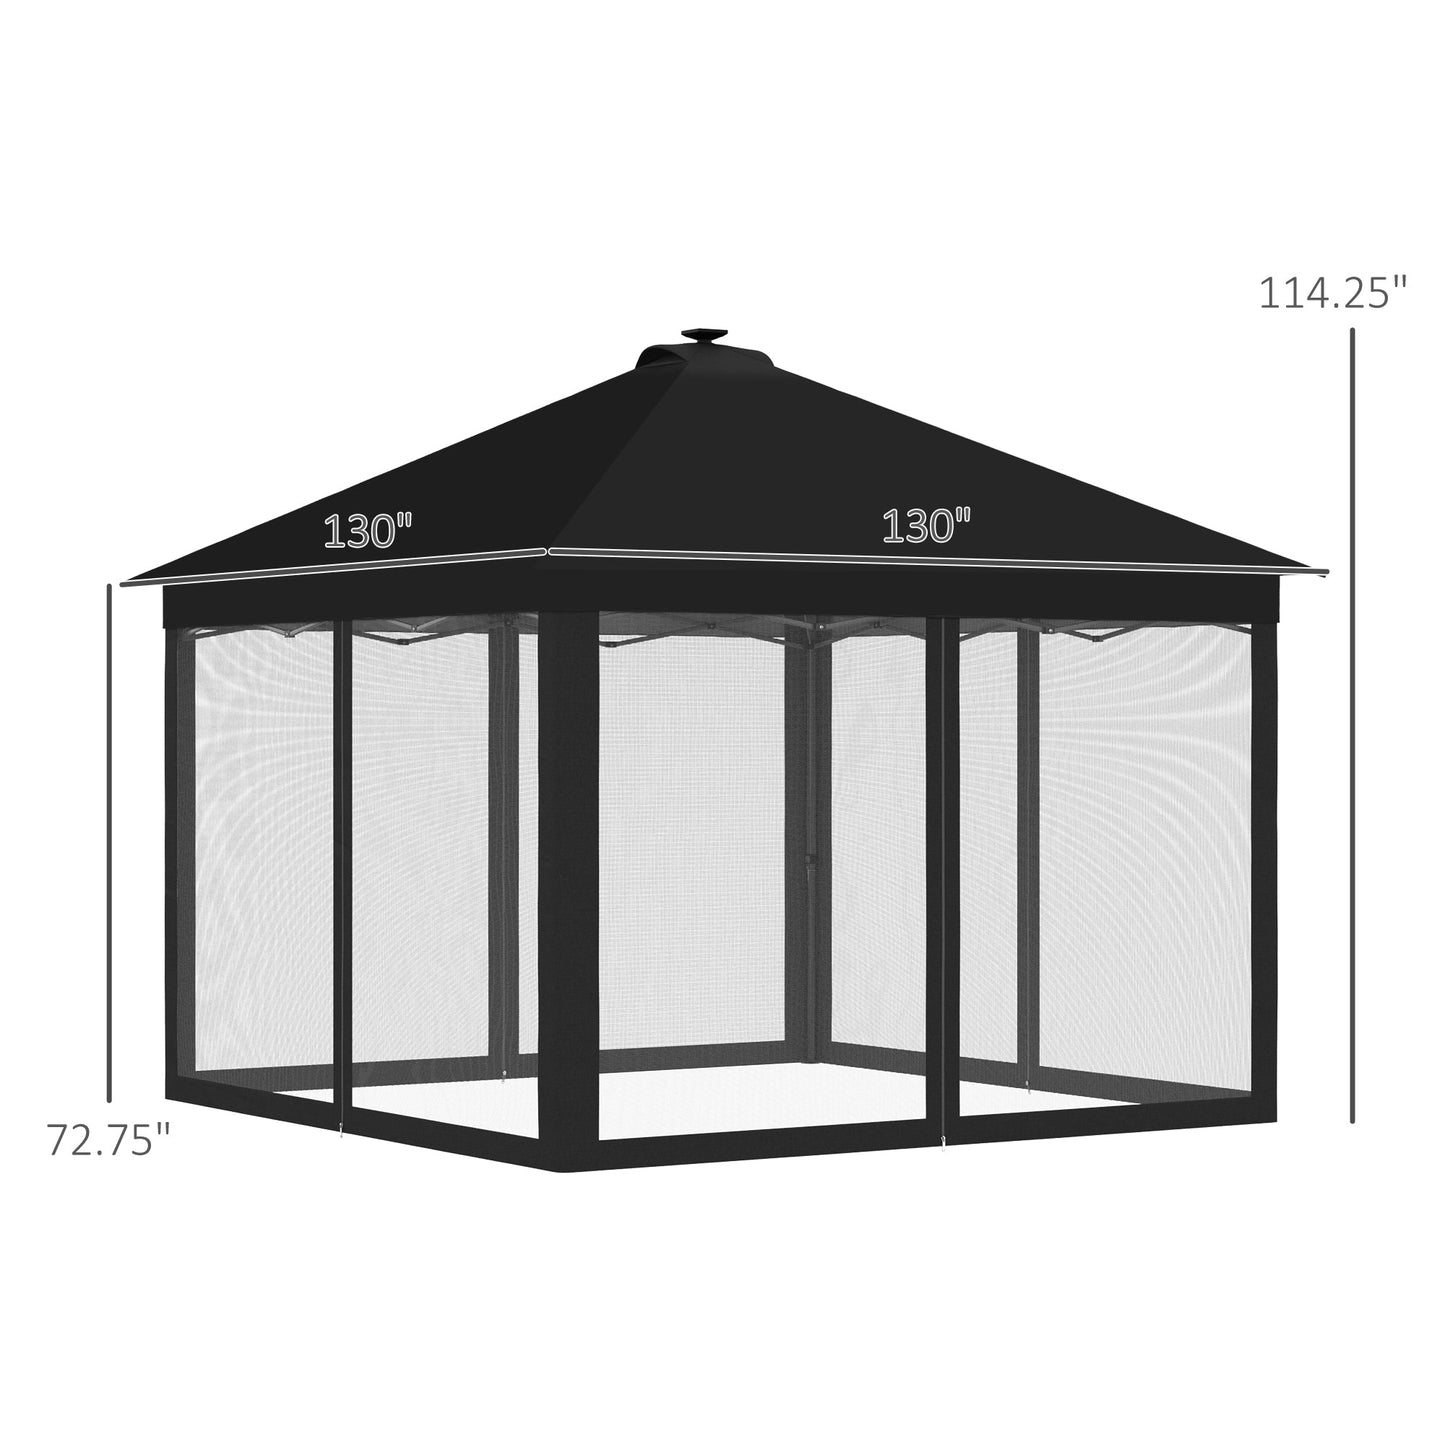 -Outsunny 11' x 11' Pop Up Canopy, Foldable Canopy Tent w/ Solar LED Light System, Remote Control & Adjustable Height for Backyard Garden Patio, Black - Outdoor Style Company